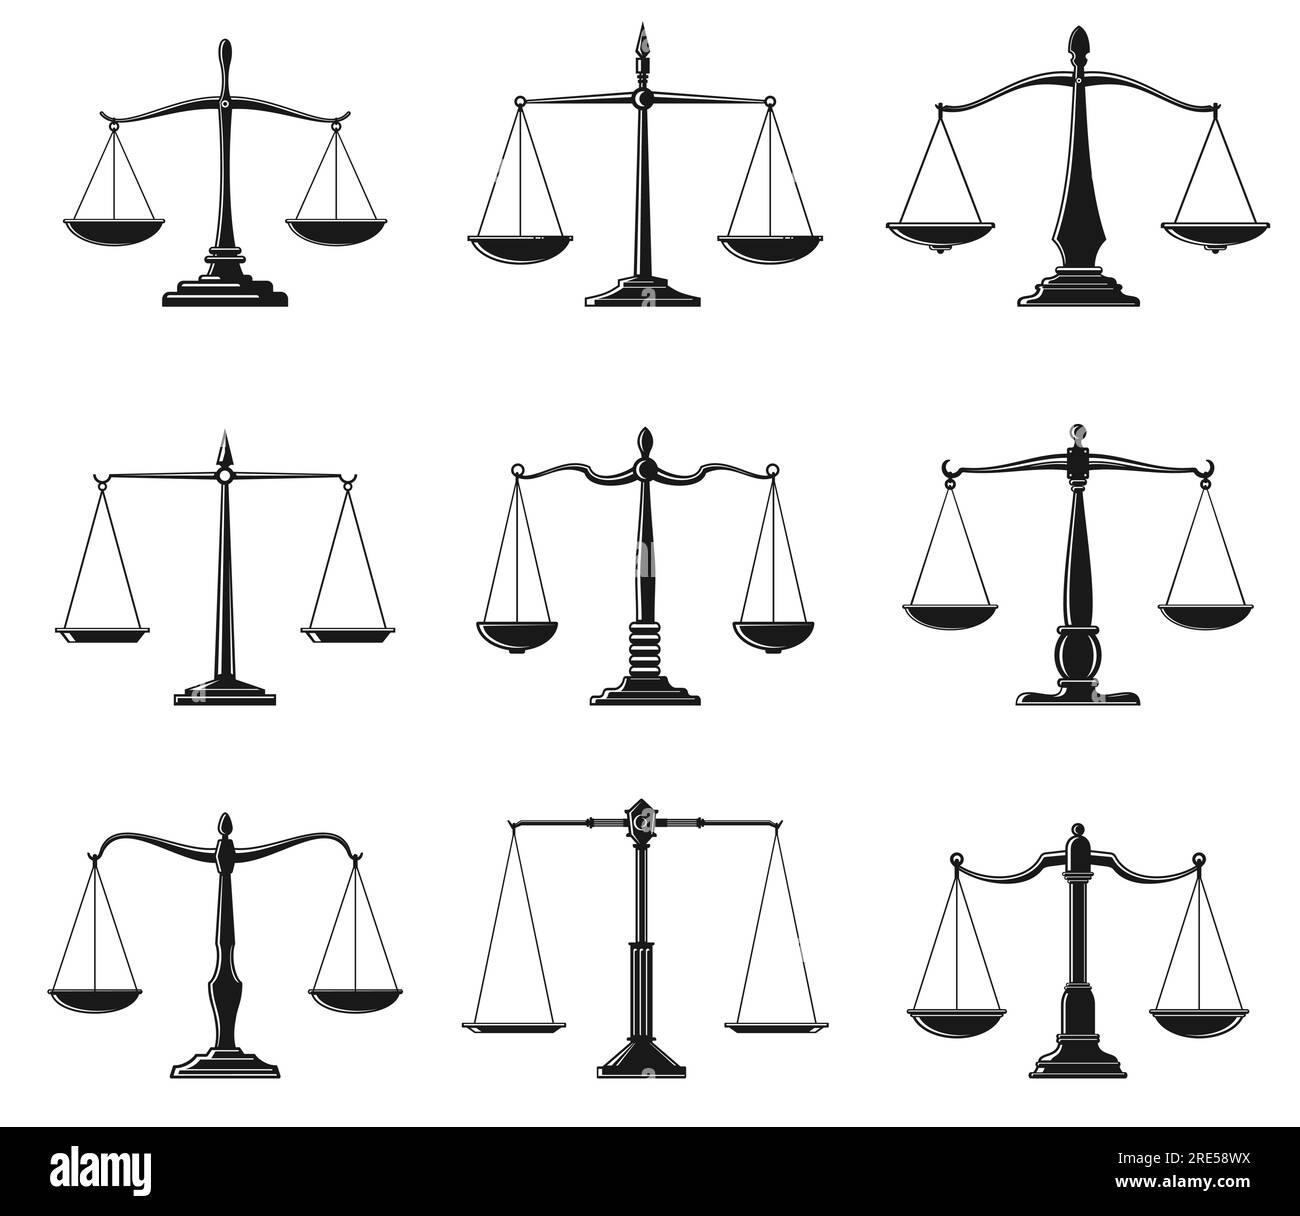 Scales of justice symbols of law balance vector design. Isolated icons of Lady Justice equal balance scales, weight measure instrument of law and order and legal protection themes Stock Vector